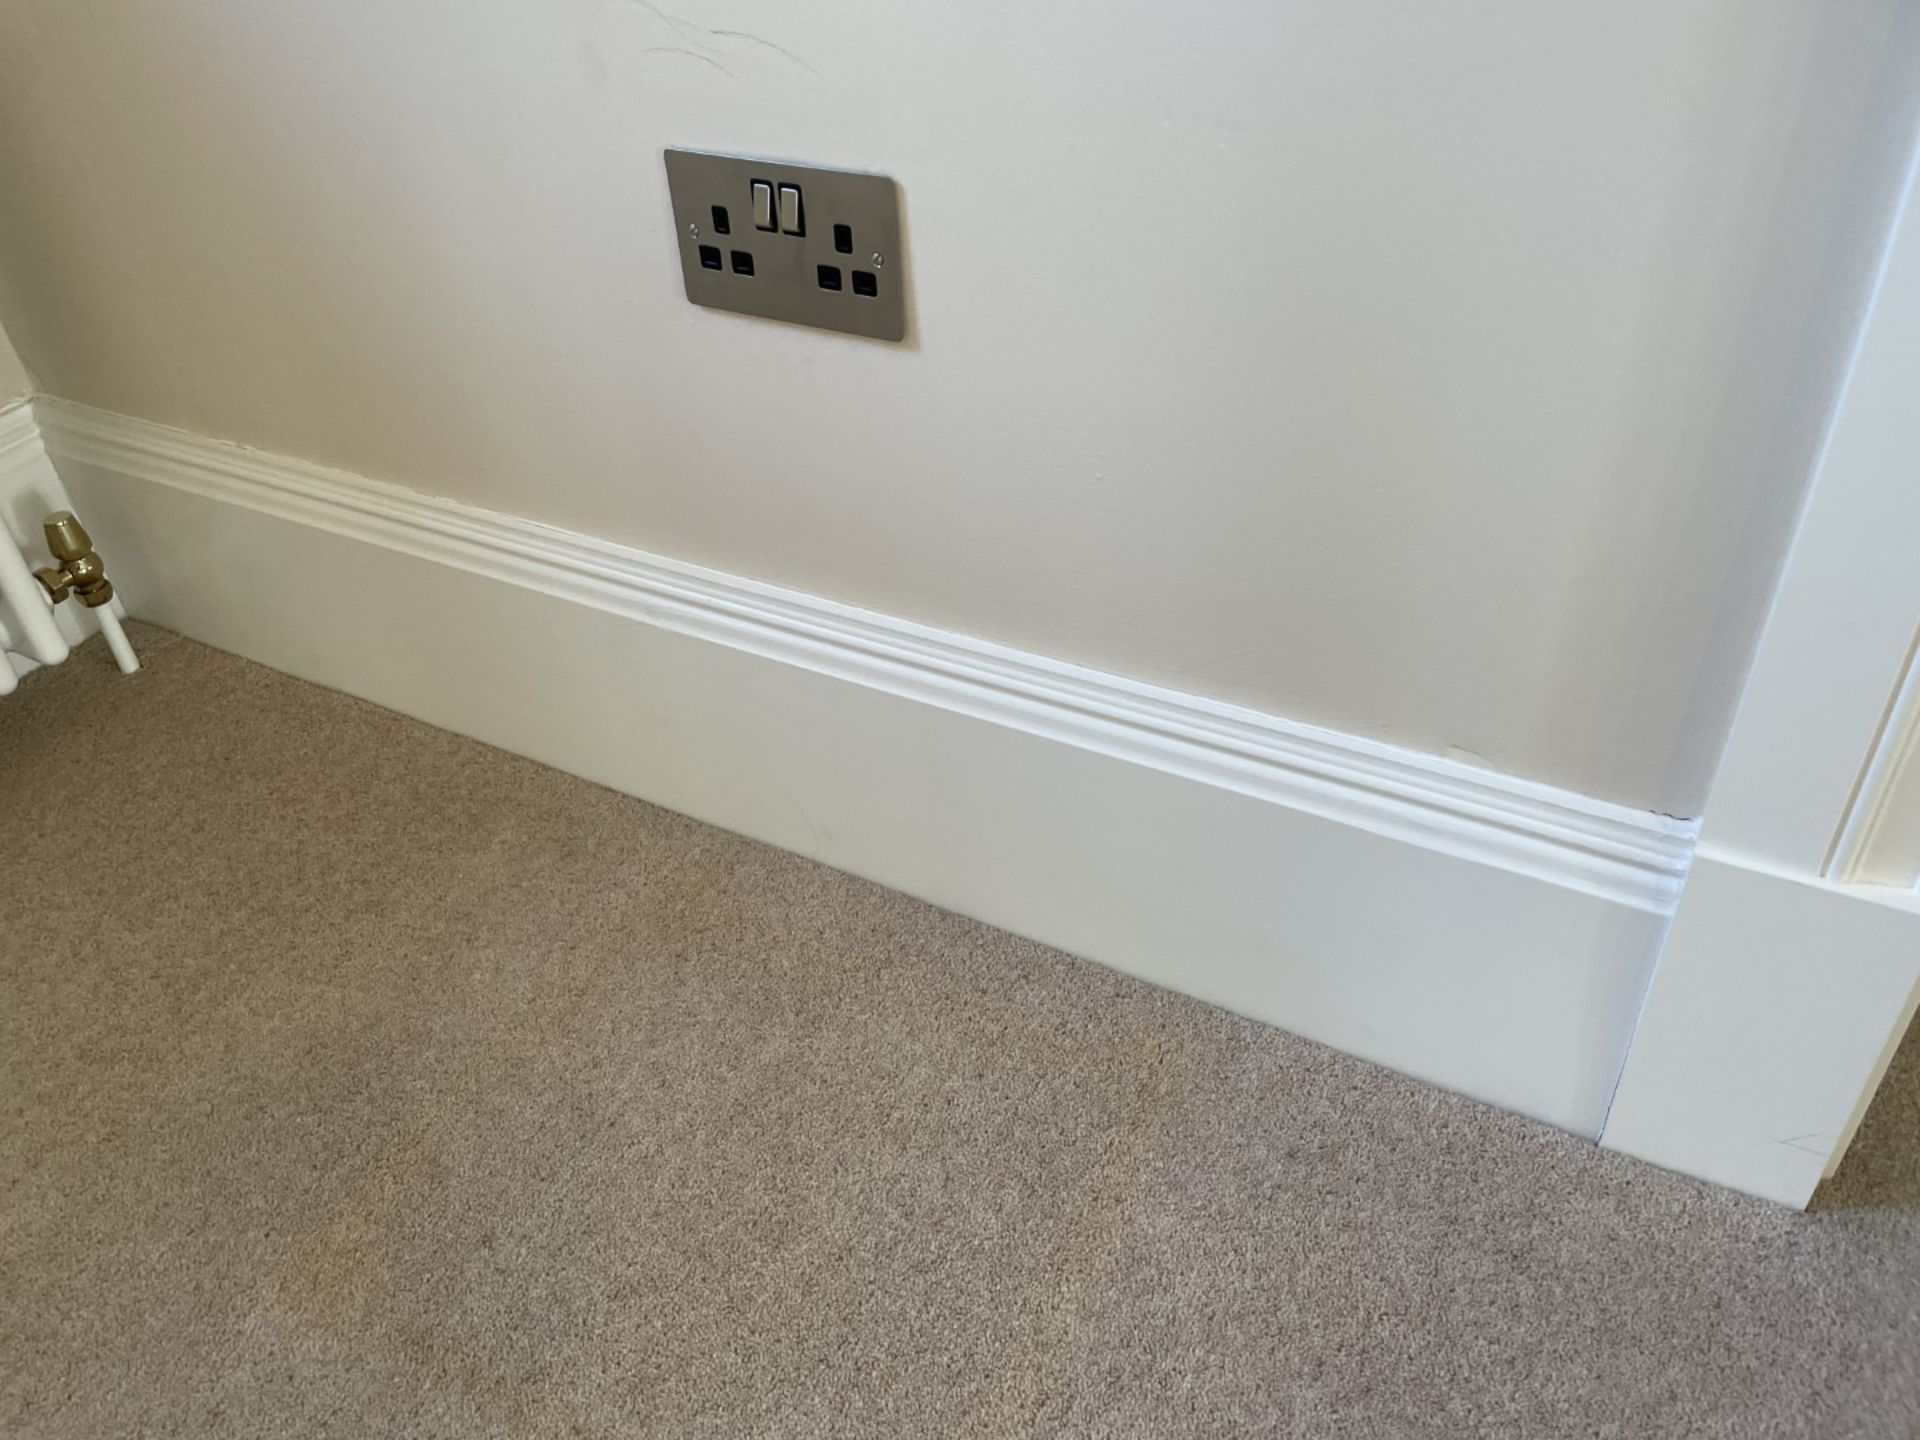 Approximately 20-Metres of Painted Timber Wooden Skirting Boards, In White - Ref: PAN219 - CL896 - - Image 6 of 8